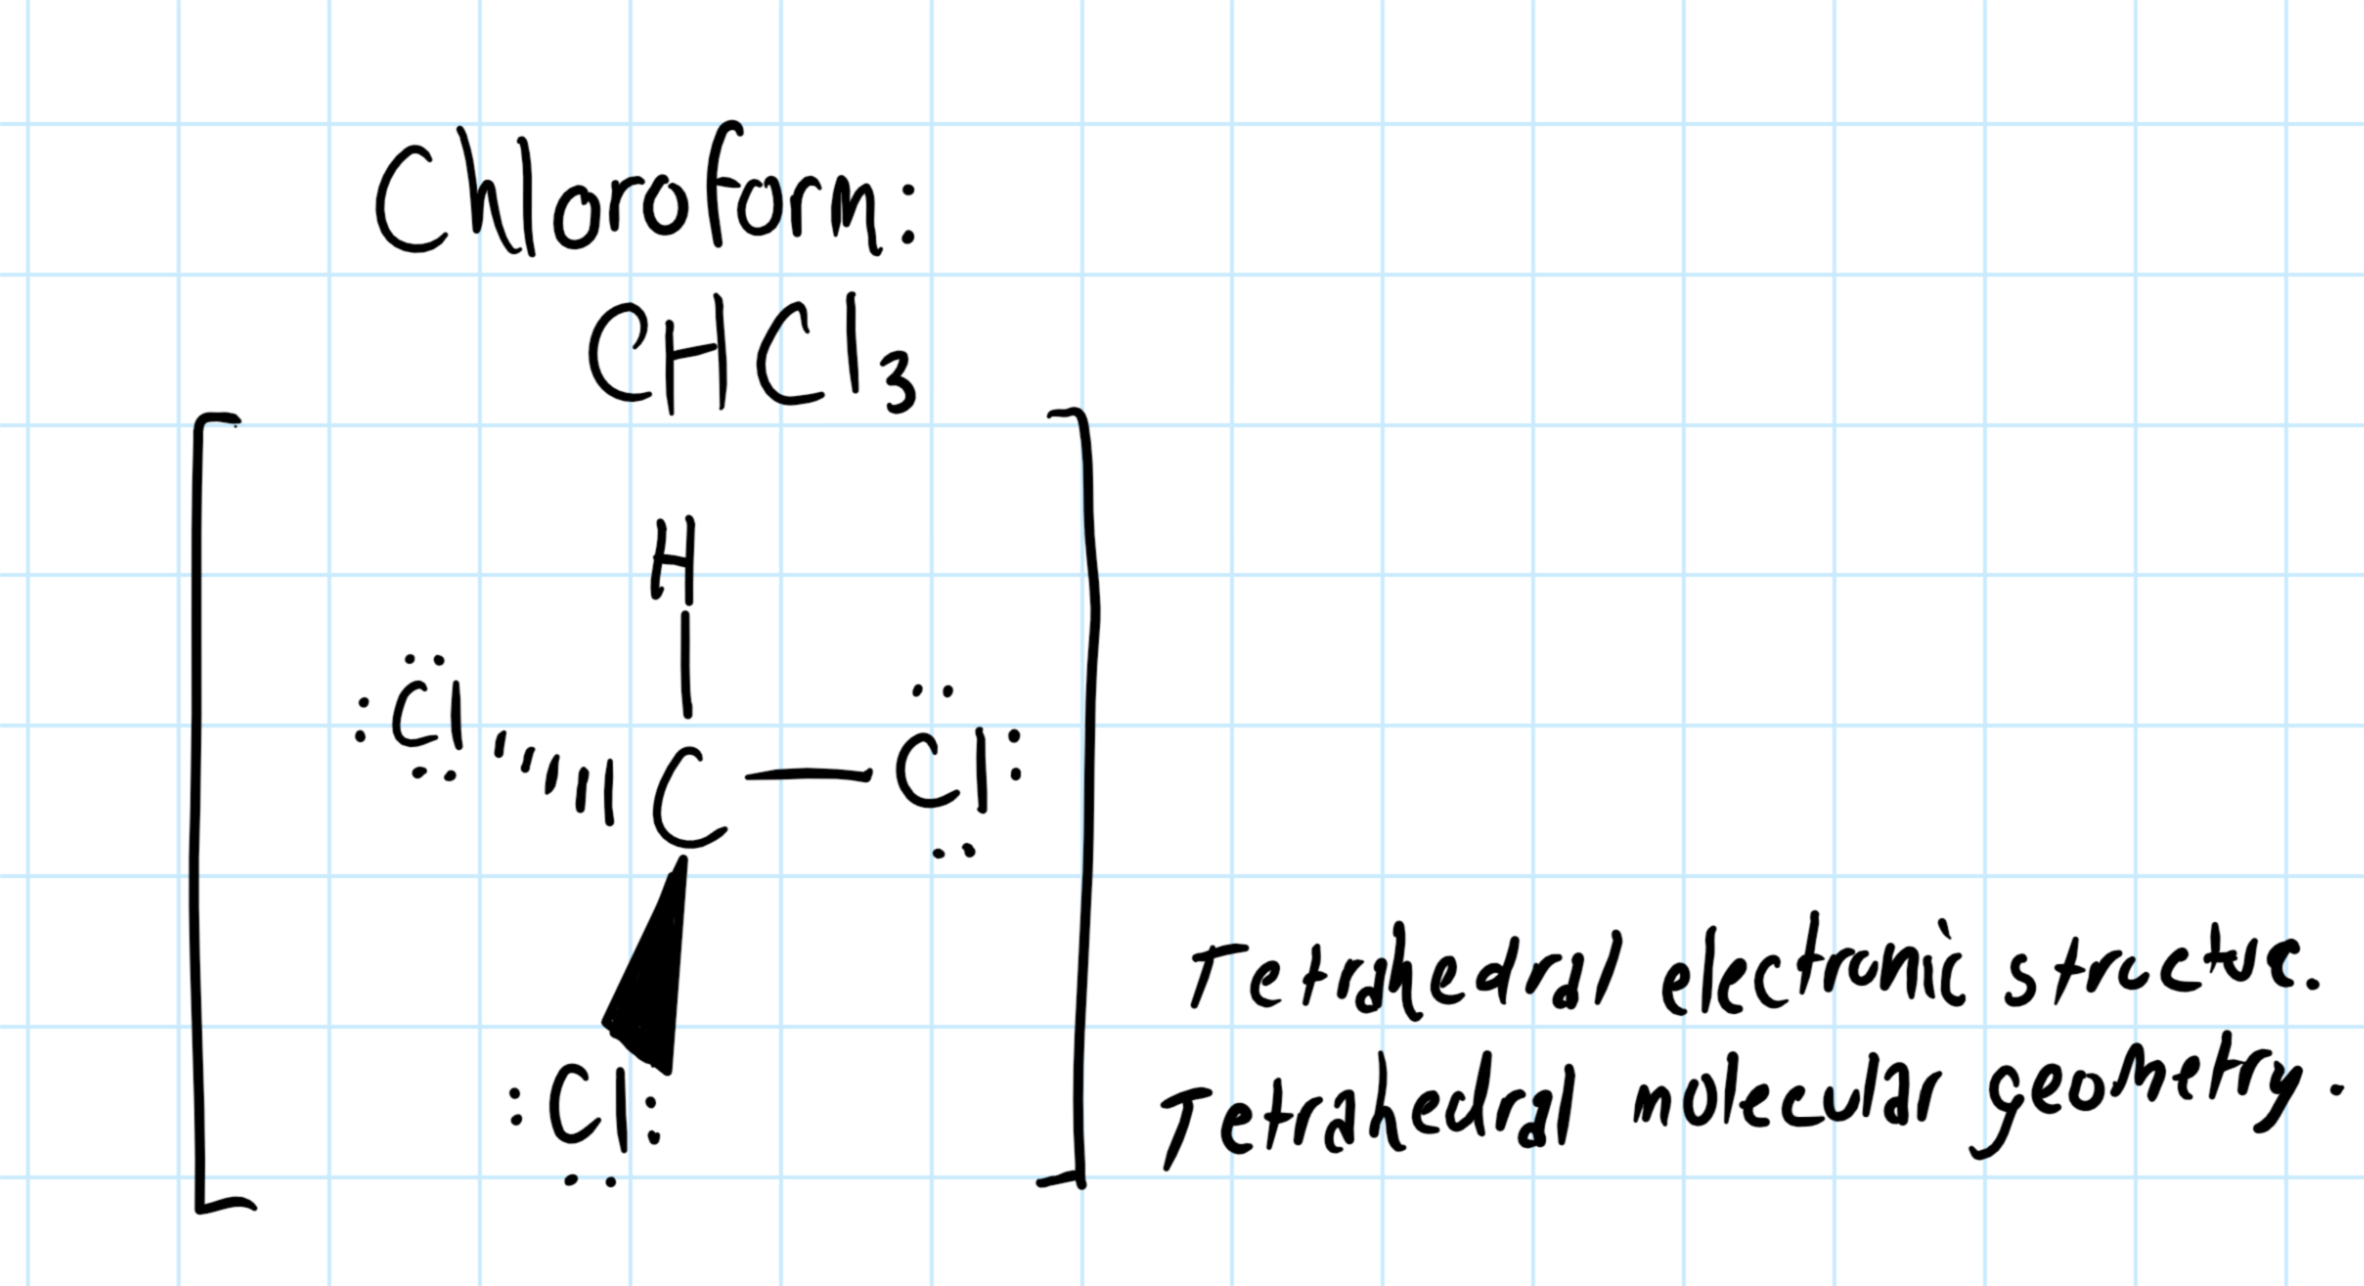 How would you draw the chloroform molecule (CHCl_3)? Socratic